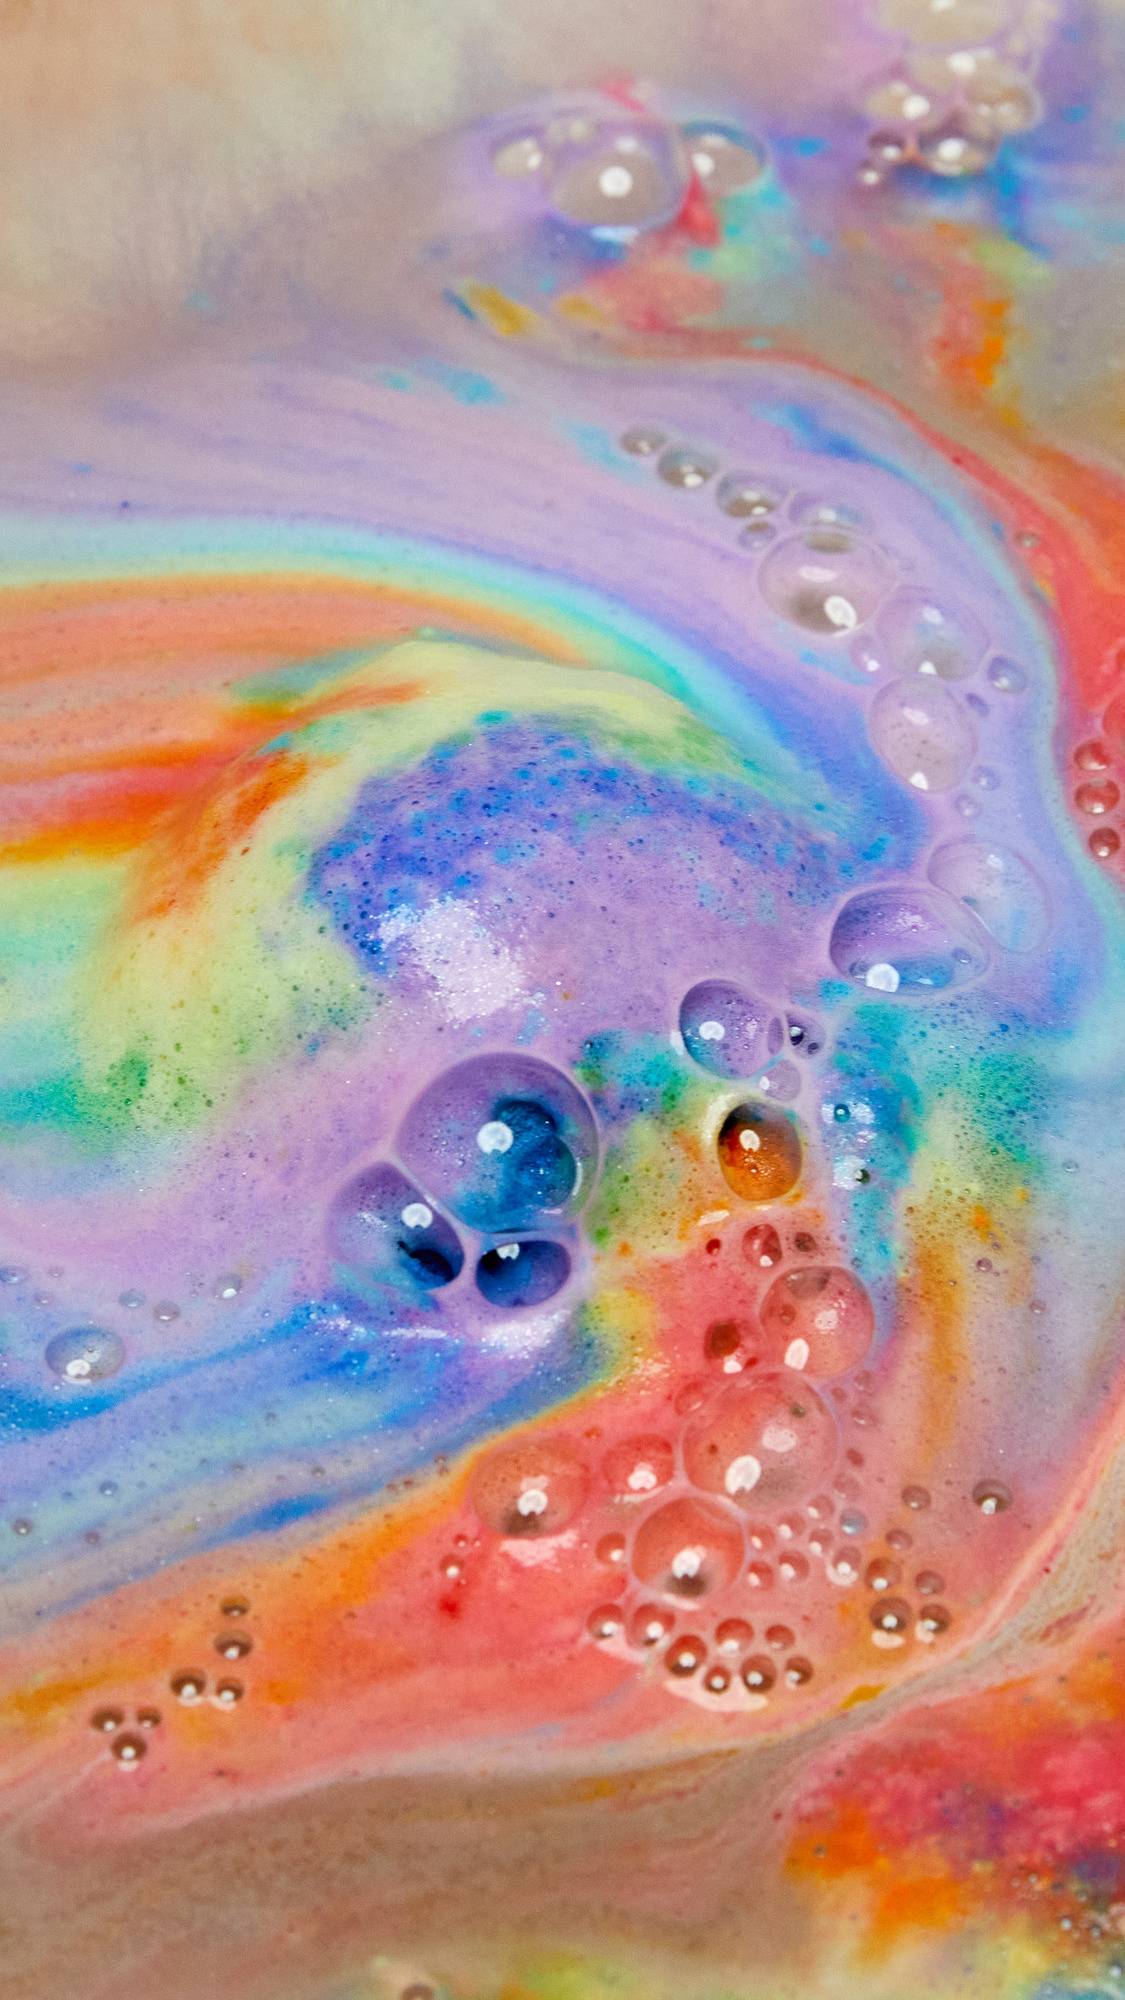 The thermal Waves bath bomb is dissolving leaving behind a thick, velvety blanket of bright rainbow swirls across the surface of the water. 